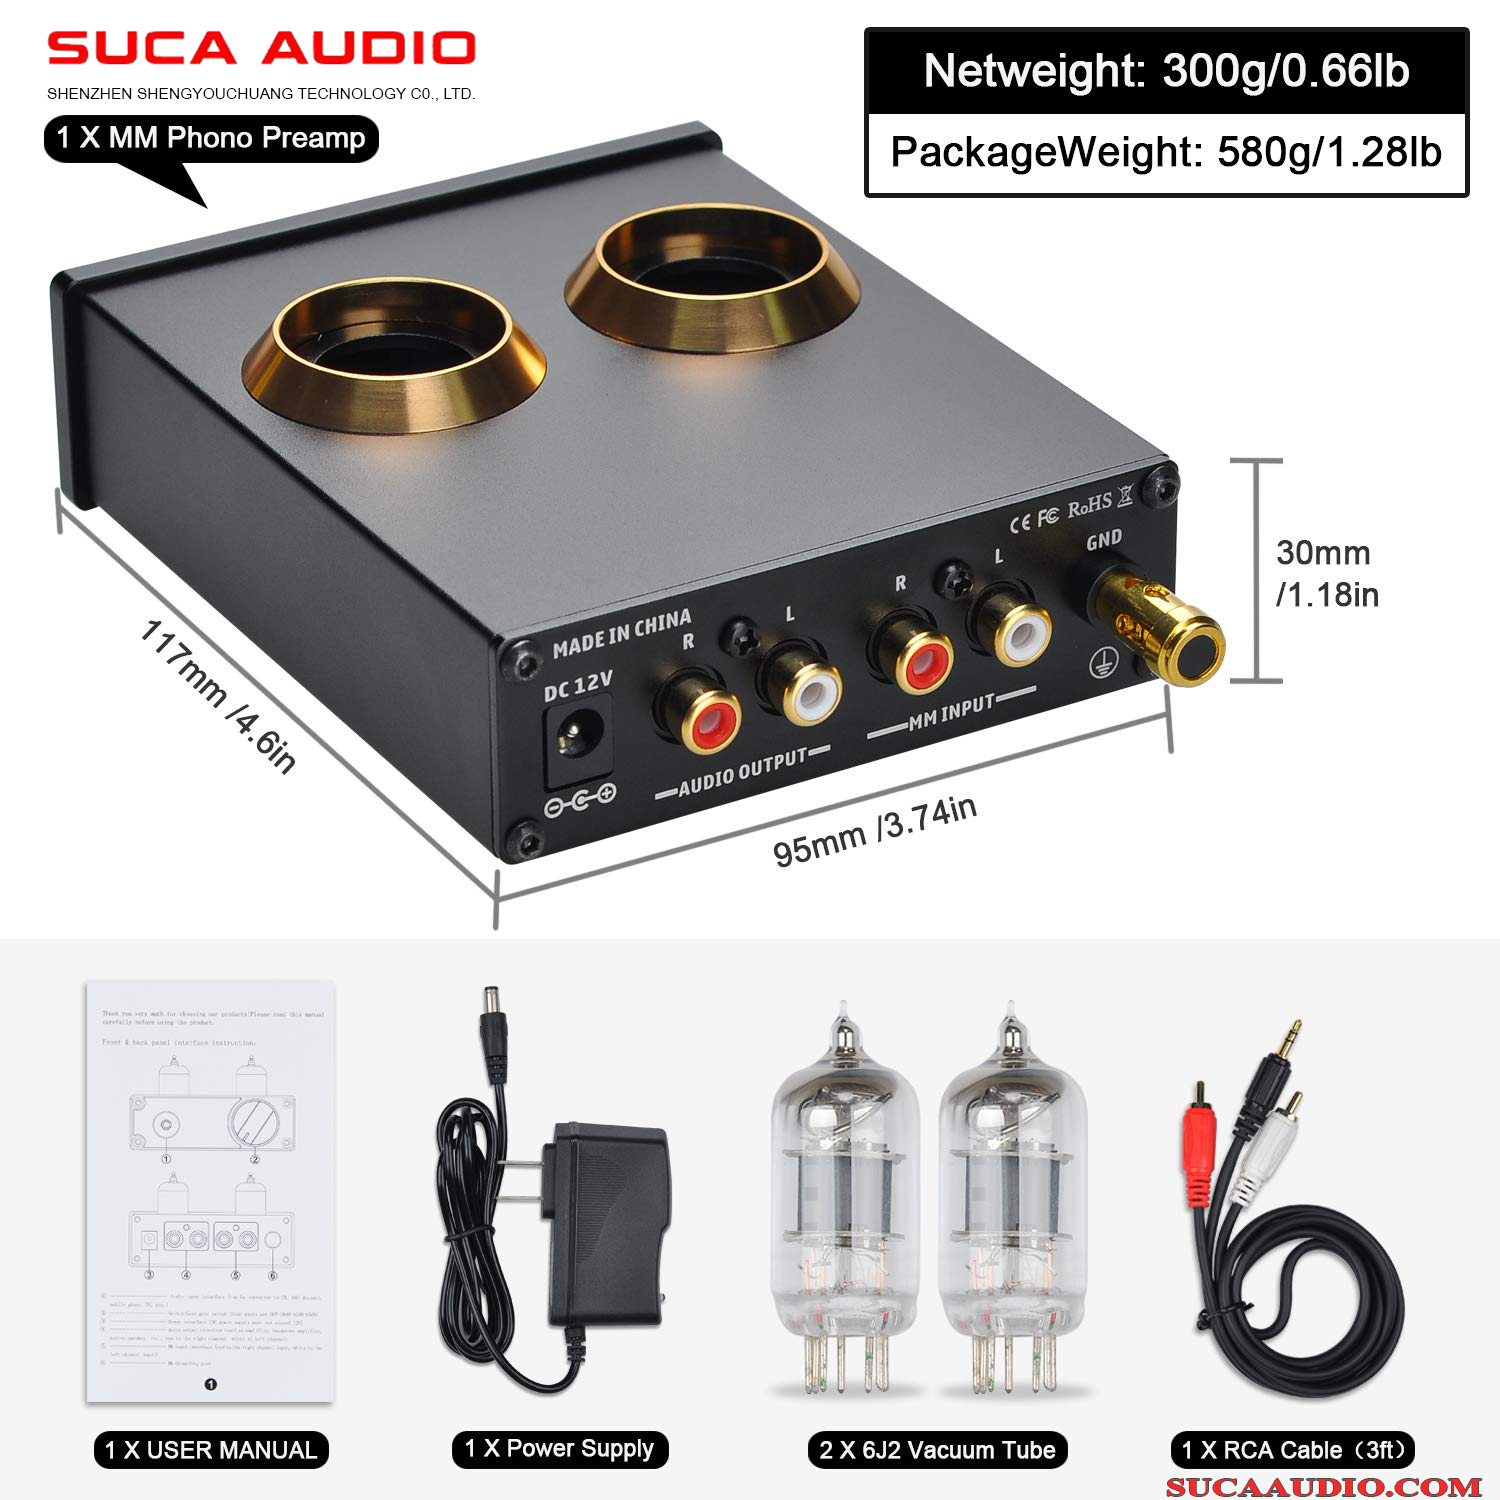 Renewed Phono Turntable Preamp SUCA-AUDIO Mini Phono Preamp Hi-Fi RIAA MM Turntable Pre Amp Low Noise with RCA Input & Output Compatible with LP Vinyl Recorder Players 